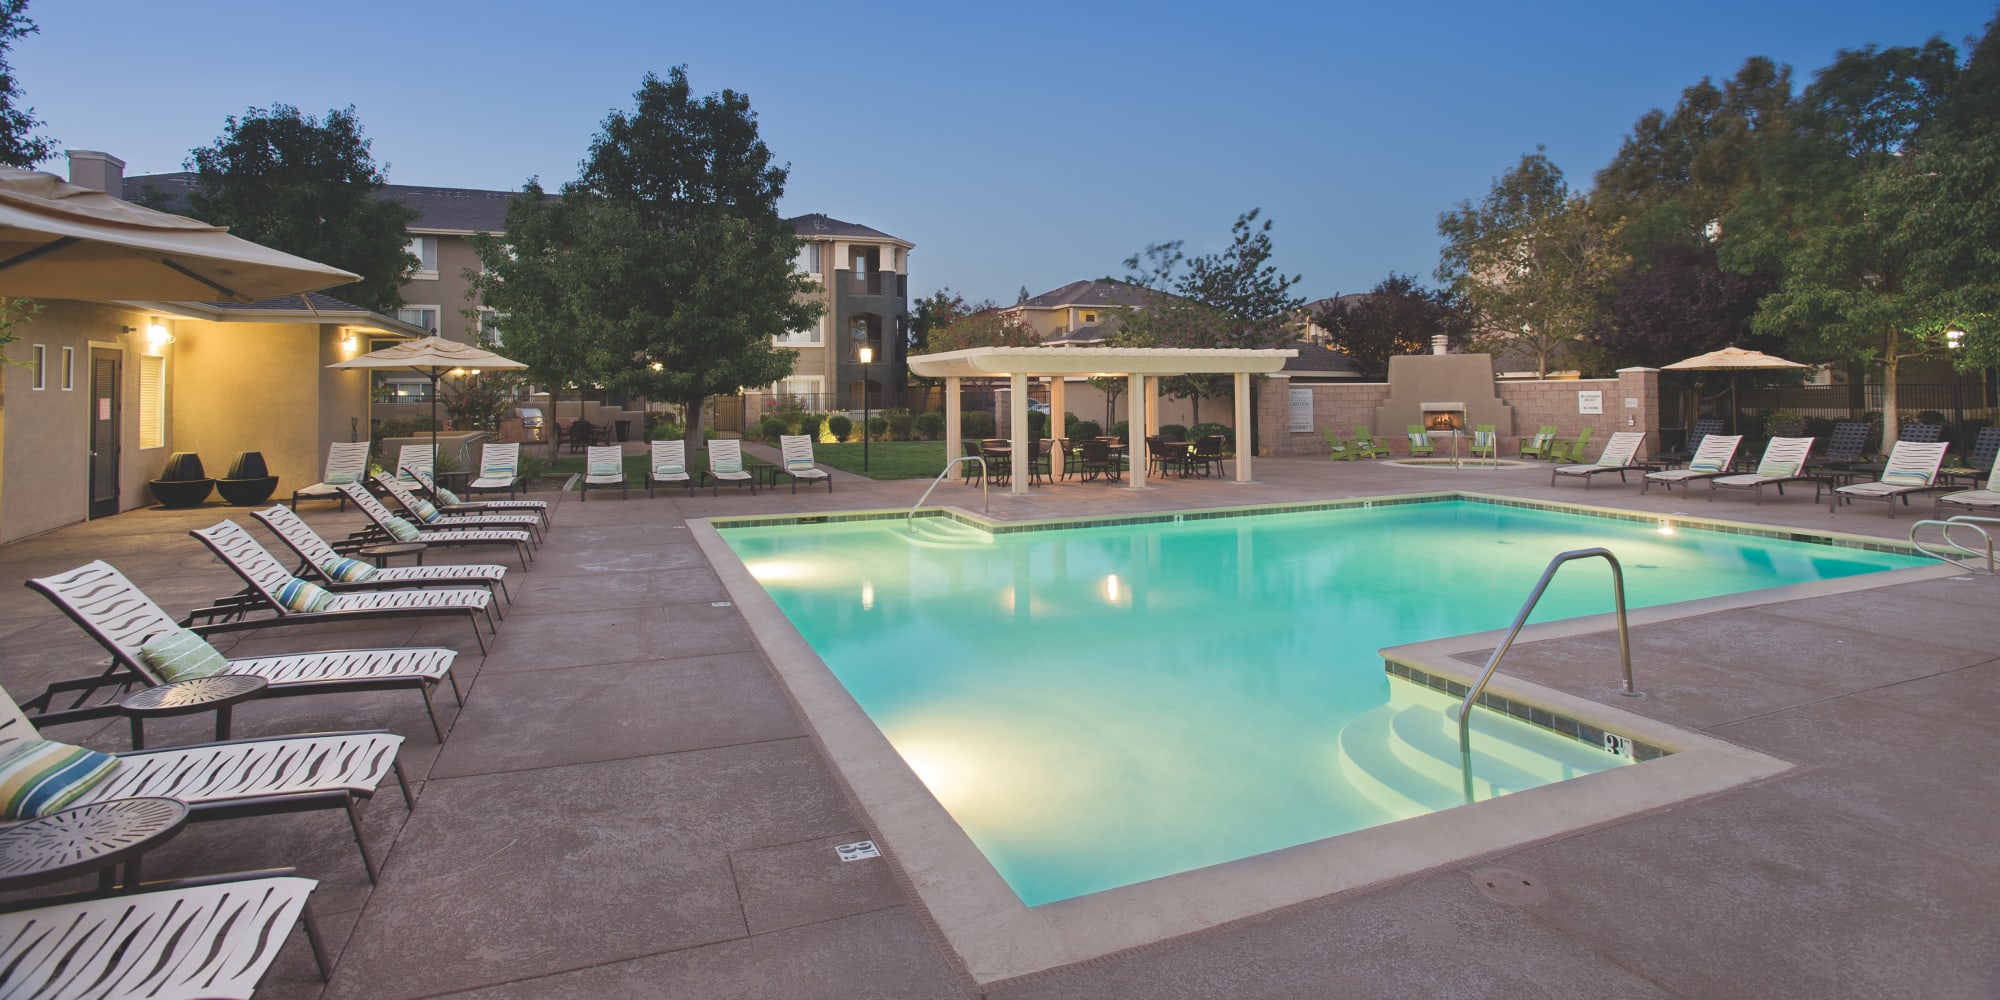 Apartments at Cross Pointe Apartment Homes in Antioch, California